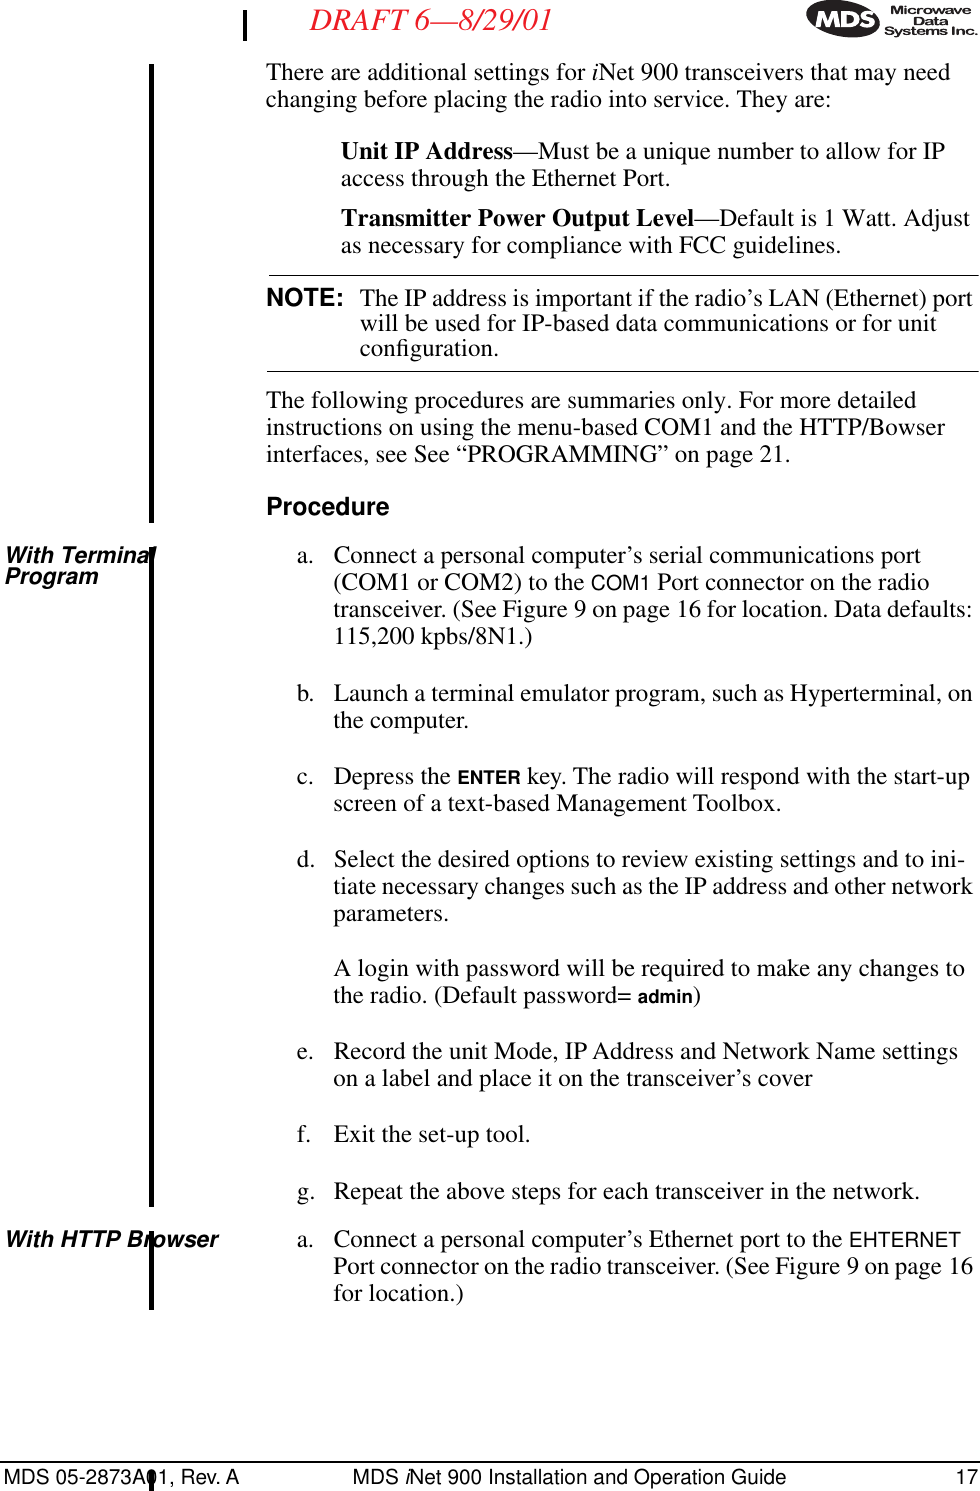 MDS 05-2873A01, Rev. A MDS iNet 900 Installation and Operation Guide 17DRAFT 6—8/29/01There are additional settings for iNet 900 transceivers that may need changing before placing the radio into service. They are:Unit IP Address—Must be a unique number to allow for IP access through the Ethernet Port.Transmitter Power Output Level—Default is 1 Watt. Adjust as necessary for compliance with FCC guidelines.NOTE: The IP address is important if the radio’s LAN (Ethernet) port will be used for IP-based data communications or for unit conﬁguration.The following procedures are summaries only. For more detailed instructions on using the menu-based COM1 and the HTTP/Bowser interfaces, see See “PROGRAMMING” on page 21.ProcedureWith Terminal Program a. Connect a personal computer’s serial communications port (COM1 or COM2) to the COM1 Port connector on the radio transceiver. (See Figure 9 on page 16 for location. Data defaults: 115,200 kpbs/8N1.)b. Launch a terminal emulator program, such as Hyperterminal, on the computer.c. Depress the ENTER key. The radio will respond with the start-up screen of a text-based Management Toolbox.d. Select the desired options to review existing settings and to ini-tiate necessary changes such as the IP address and other network parameters.A login with password will be required to make any changes to the radio. (Default password= admin)e. Record the unit Mode, IP Address and Network Name settings on a label and place it on the transceiver’s coverf. Exit the set-up tool. g. Repeat the above steps for each transceiver in the network.With HTTP Browser a. Connect a personal computer’s Ethernet port to the EHTERNET Port connector on the radio transceiver. (See Figure 9 on page 16 for location.)